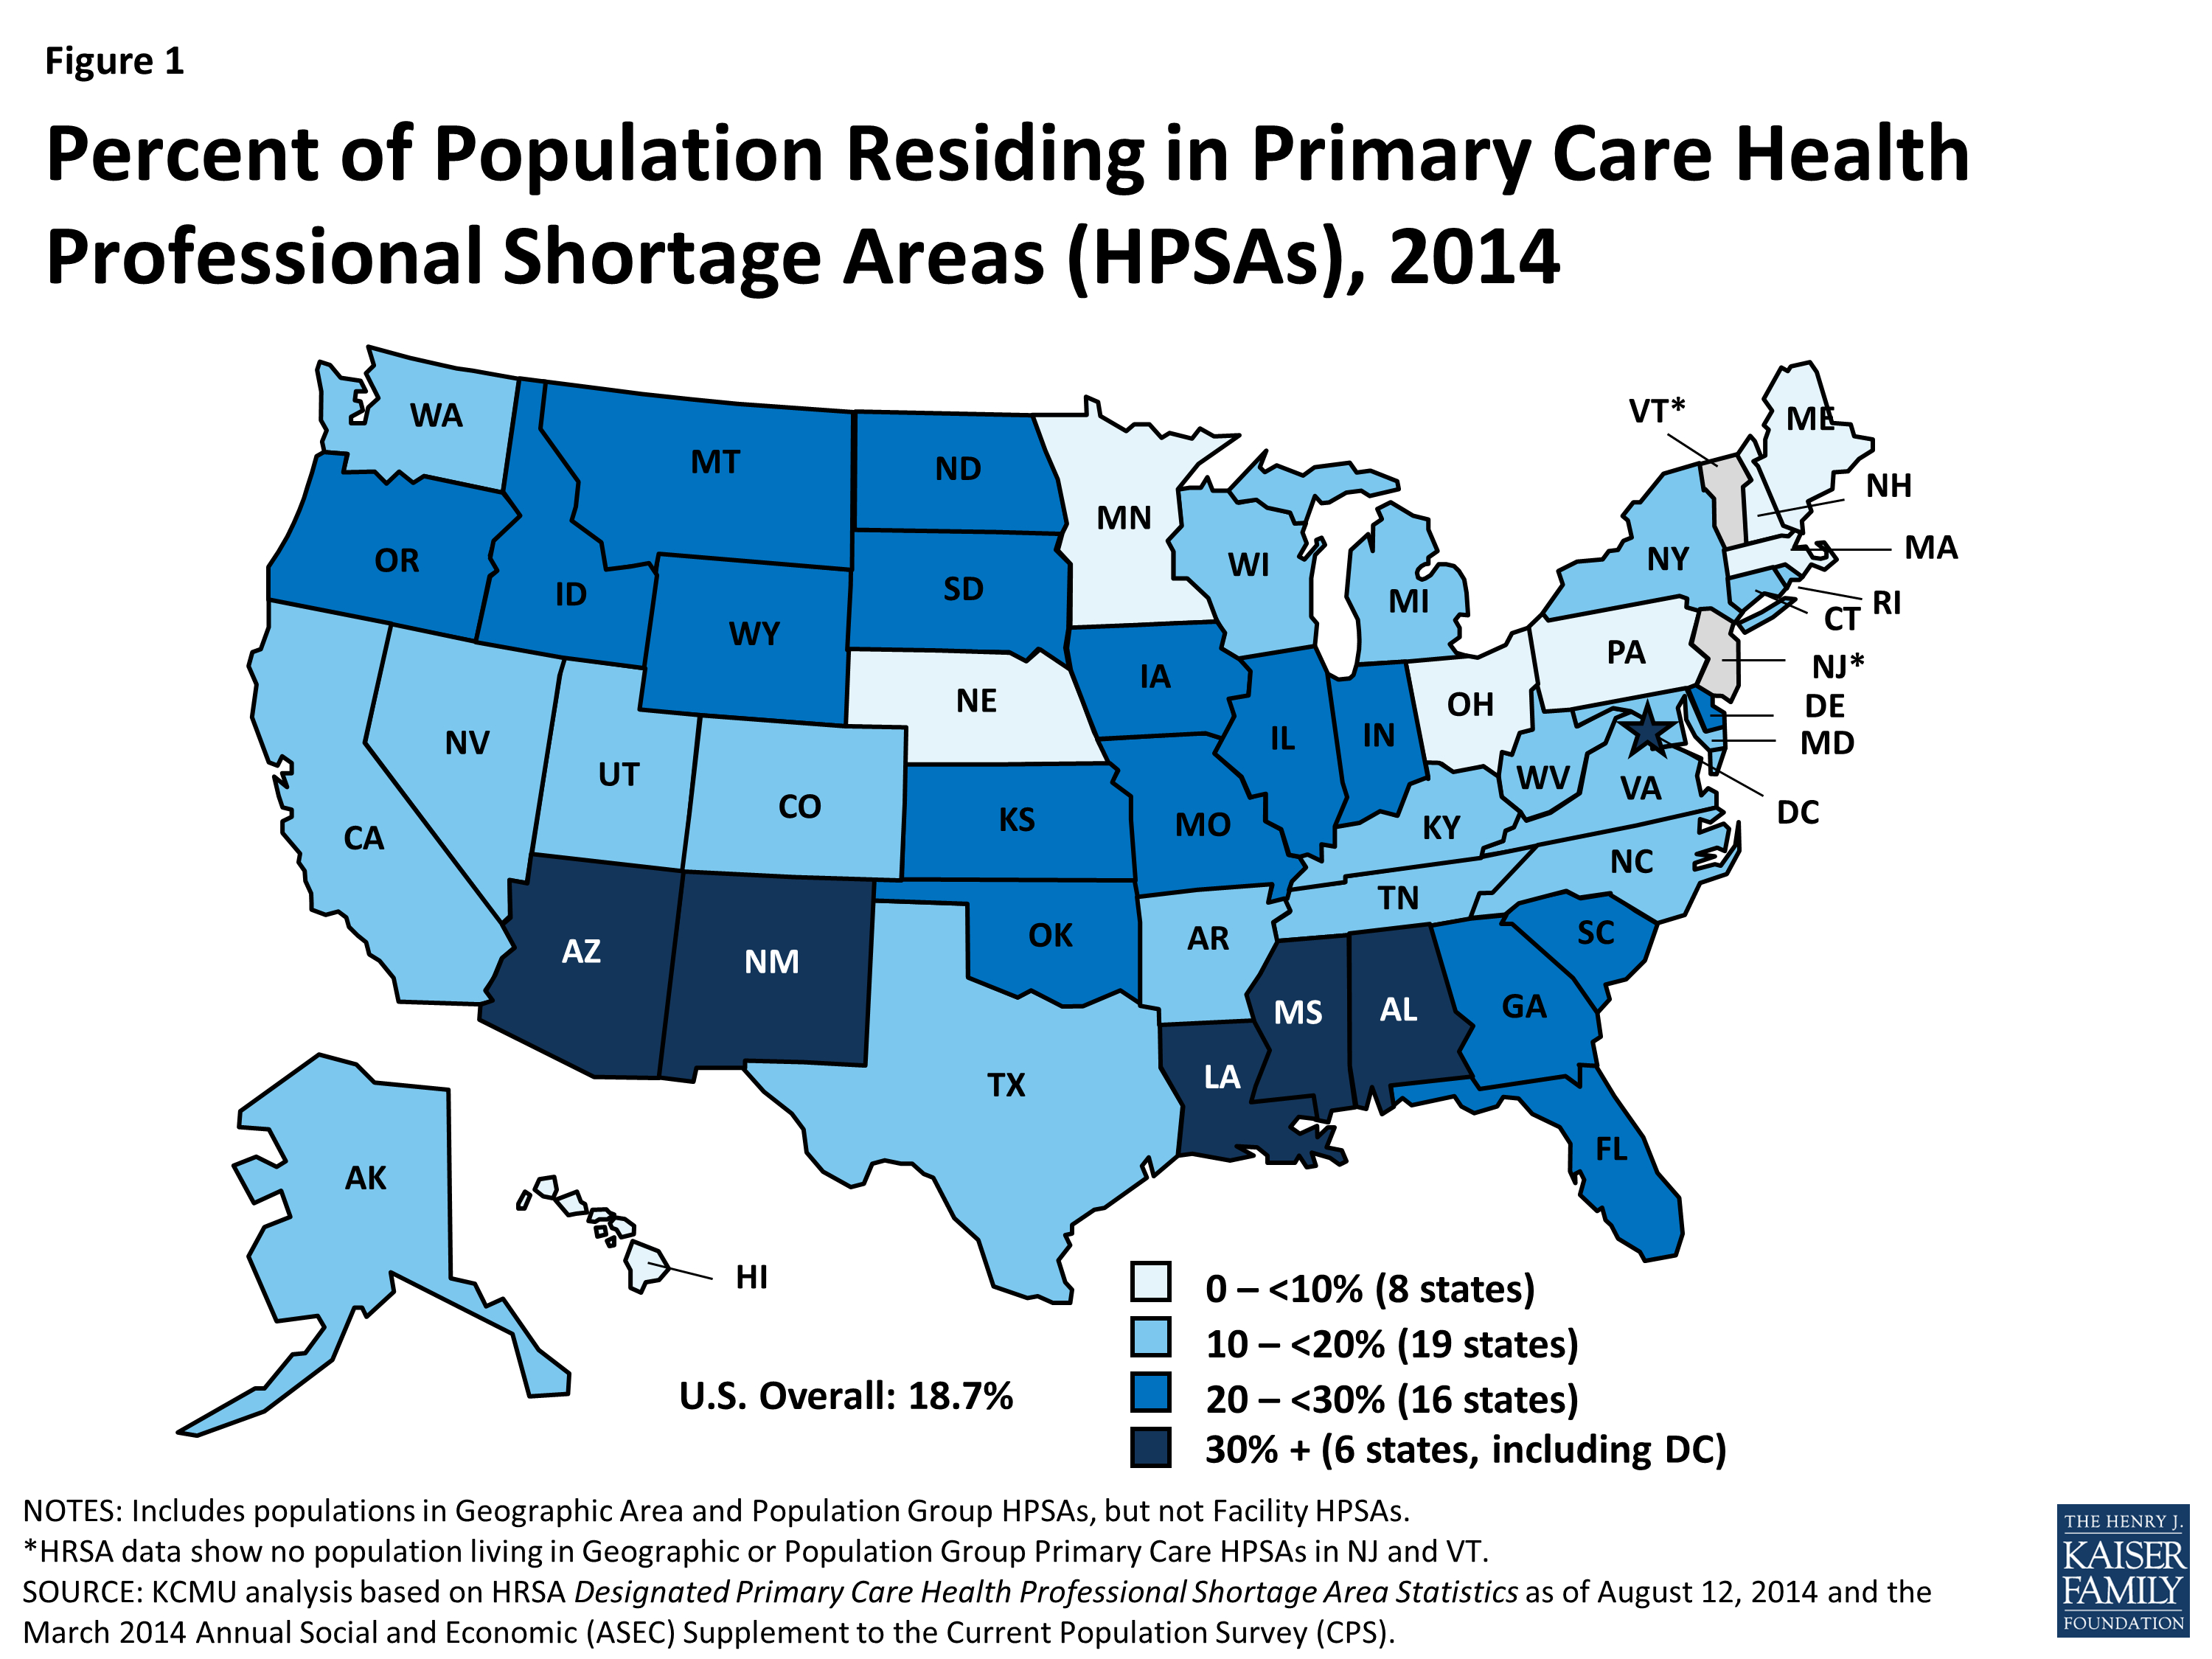 Collaborative Practice Agreement Nurse Practitioner Tapping Nurse Practitioners To Meet Rising Demand For Primary Care